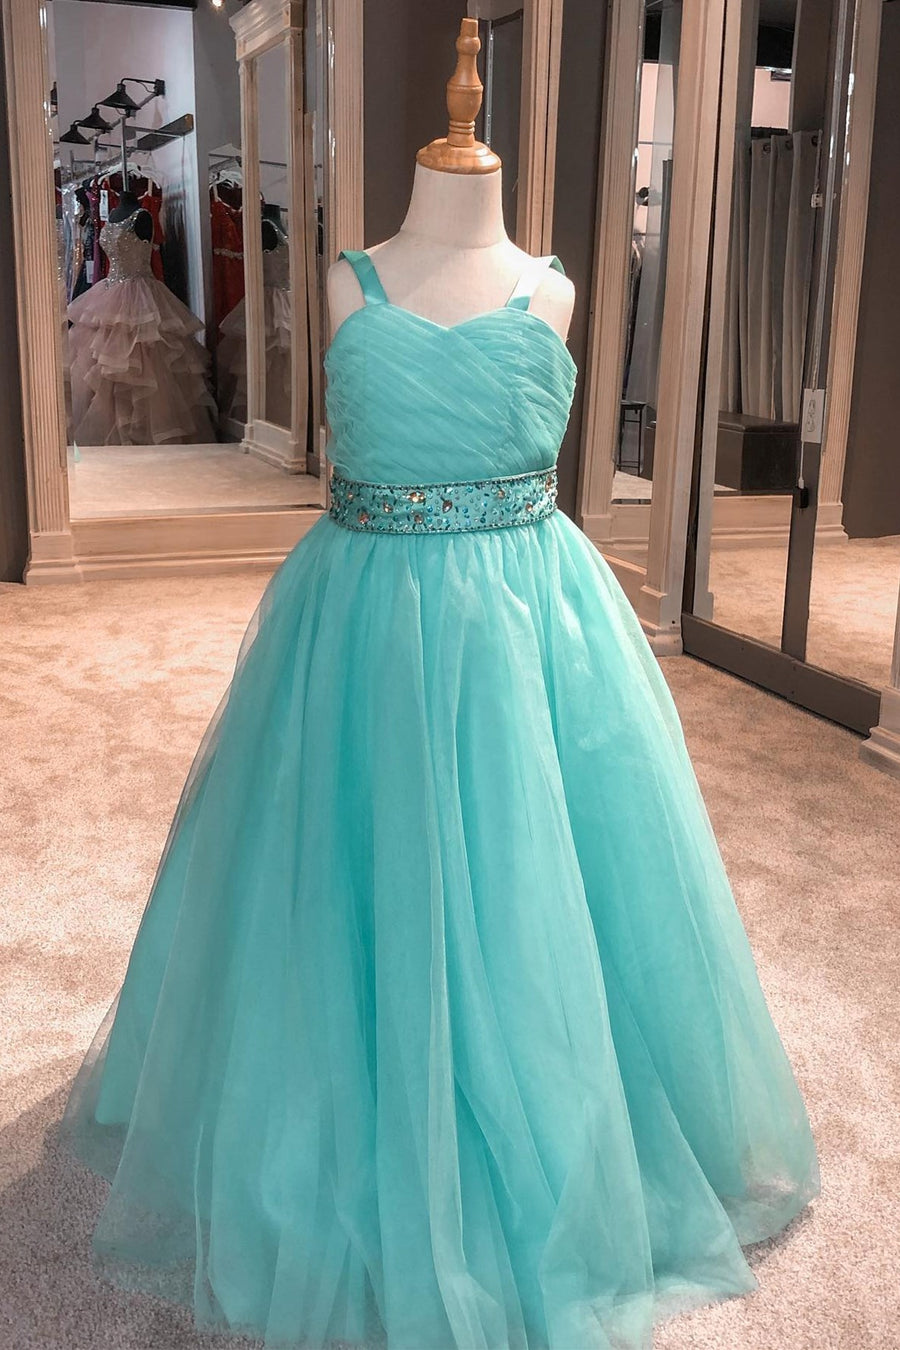 Aqua Blue Tulle A-Line Girl Pageant Dress with Rhinestones